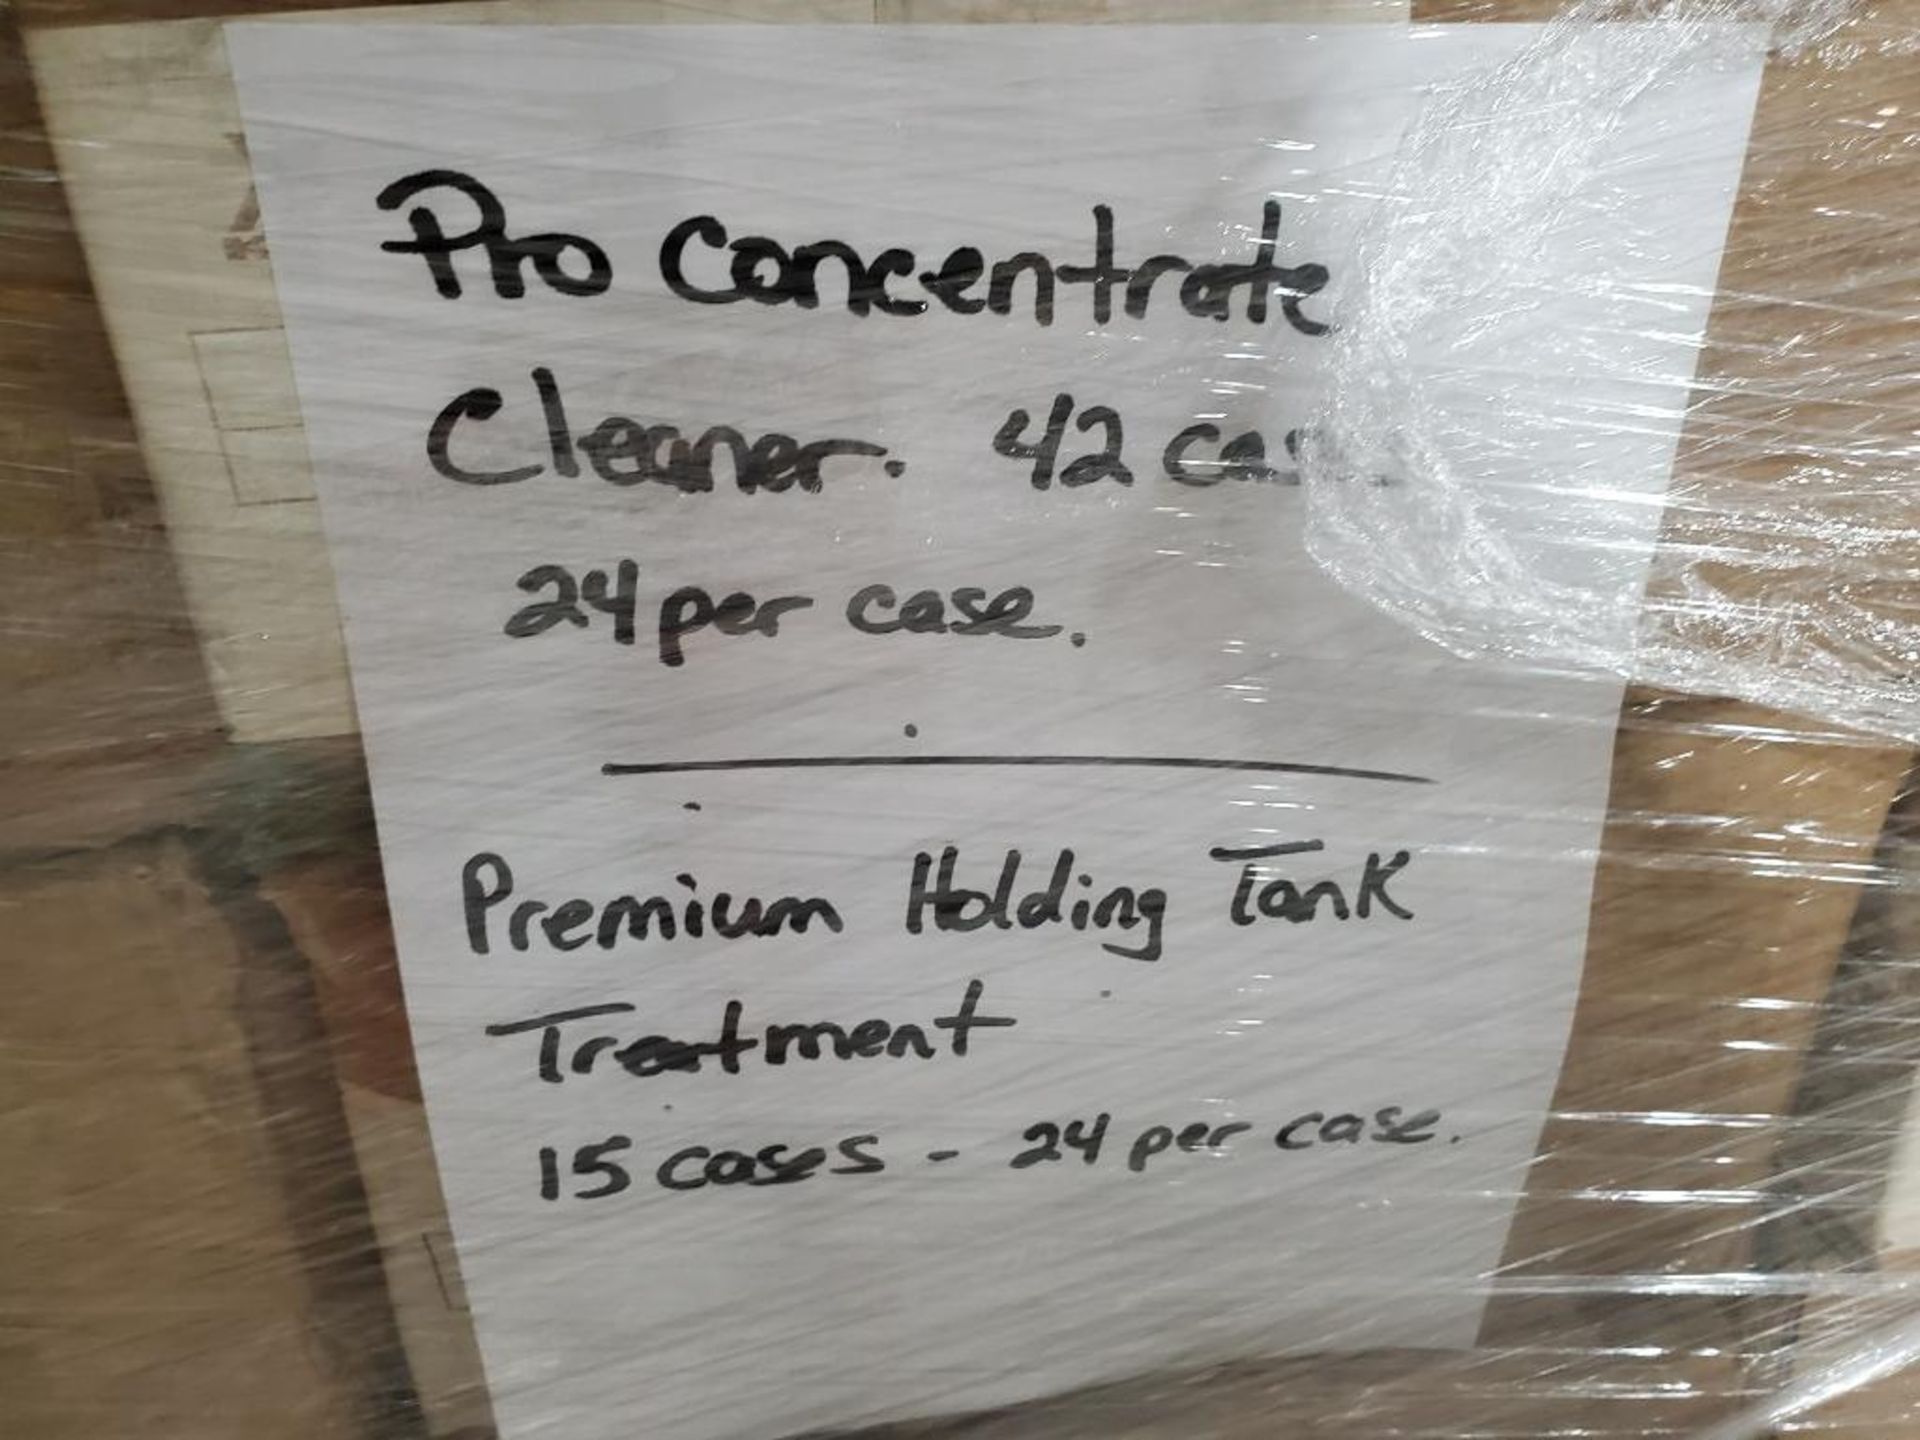 1008 ct - Pro concentrate cleaner and 360ct premium holding tank treament. - Image 2 of 4